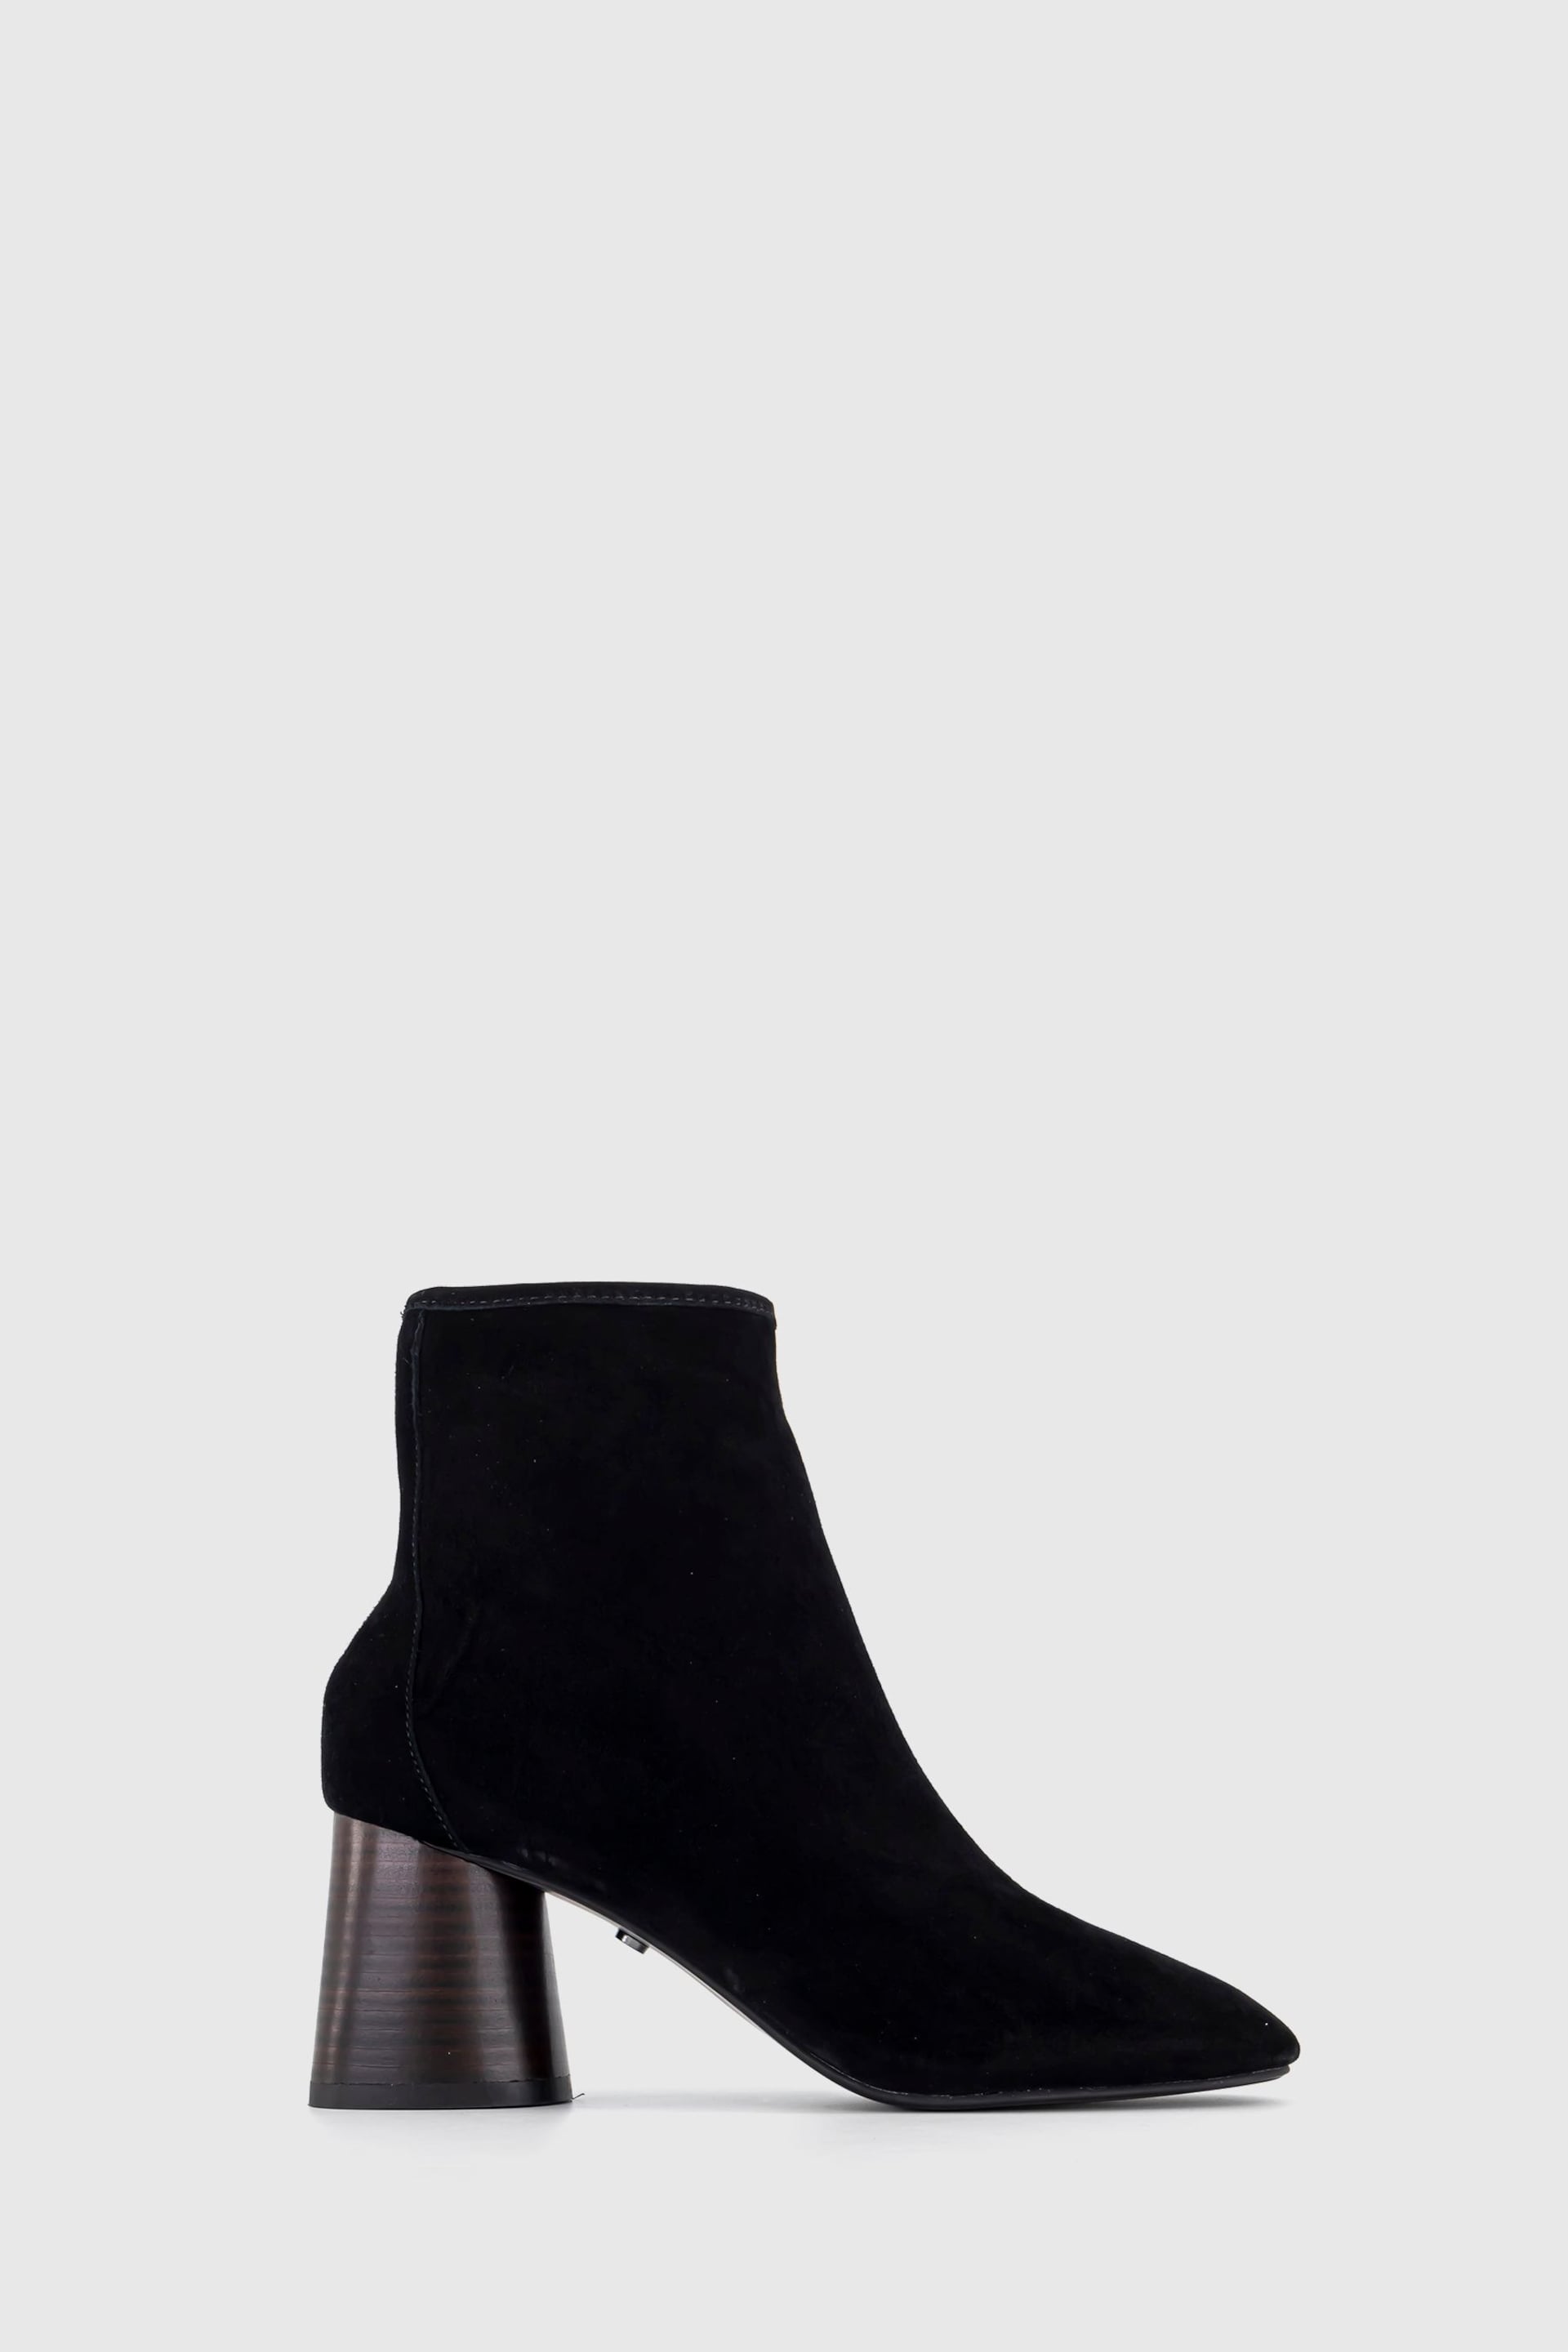 Office Black Suede Sock Ash Ankle Boots - Image 1 of 4